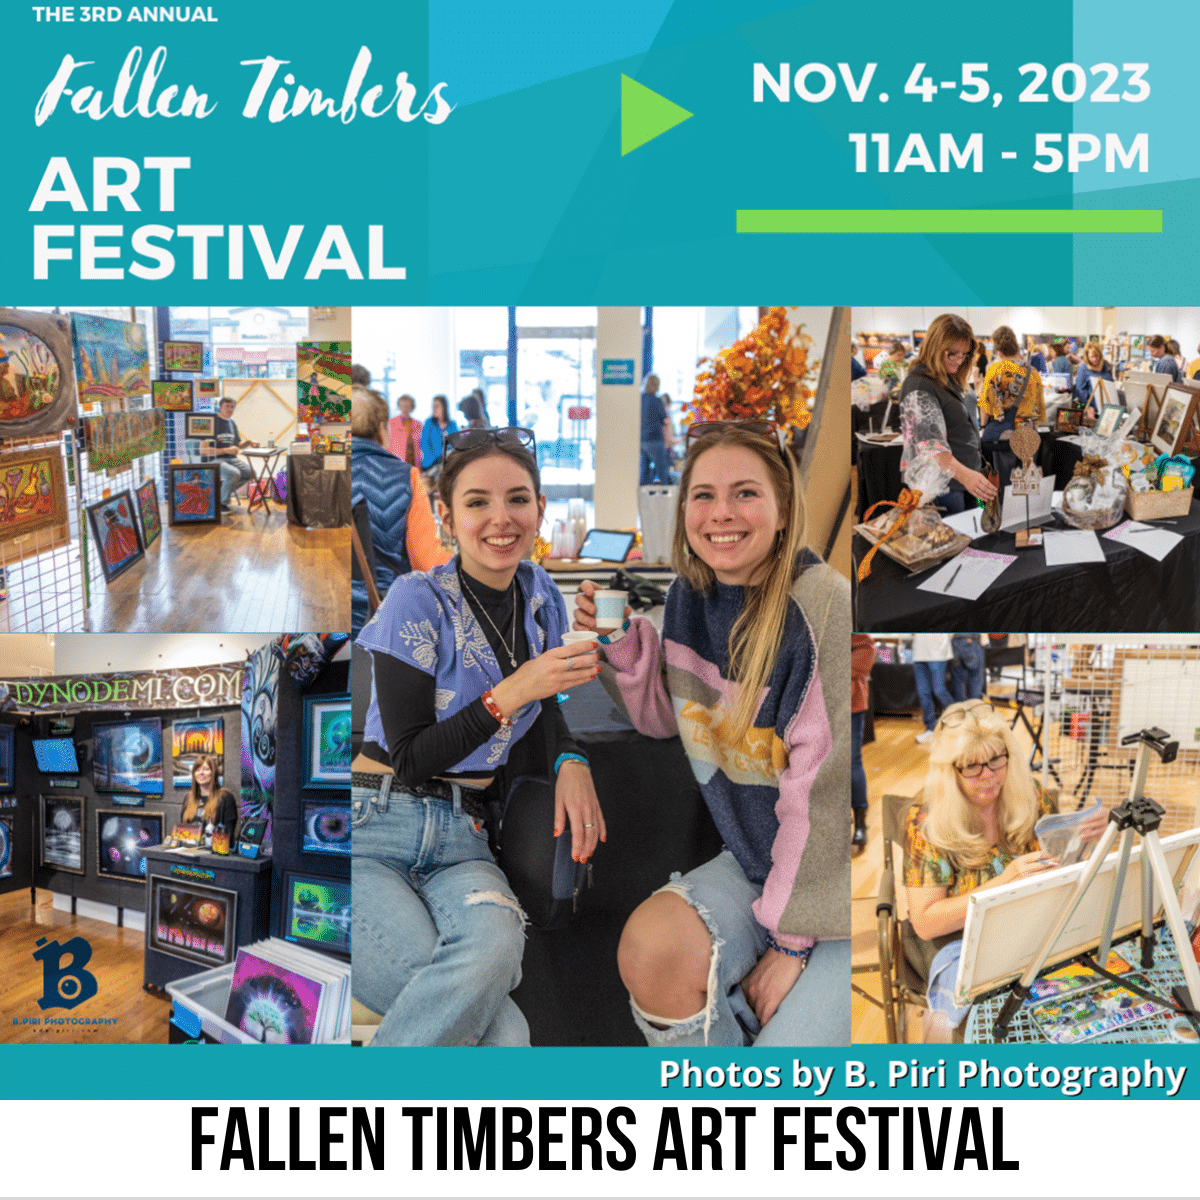 square image with a photo of the Fallen Timbers Art Festival leaflet with four images of various things and places at the festival. Image courtesy of Fallen Timbers Art Festival